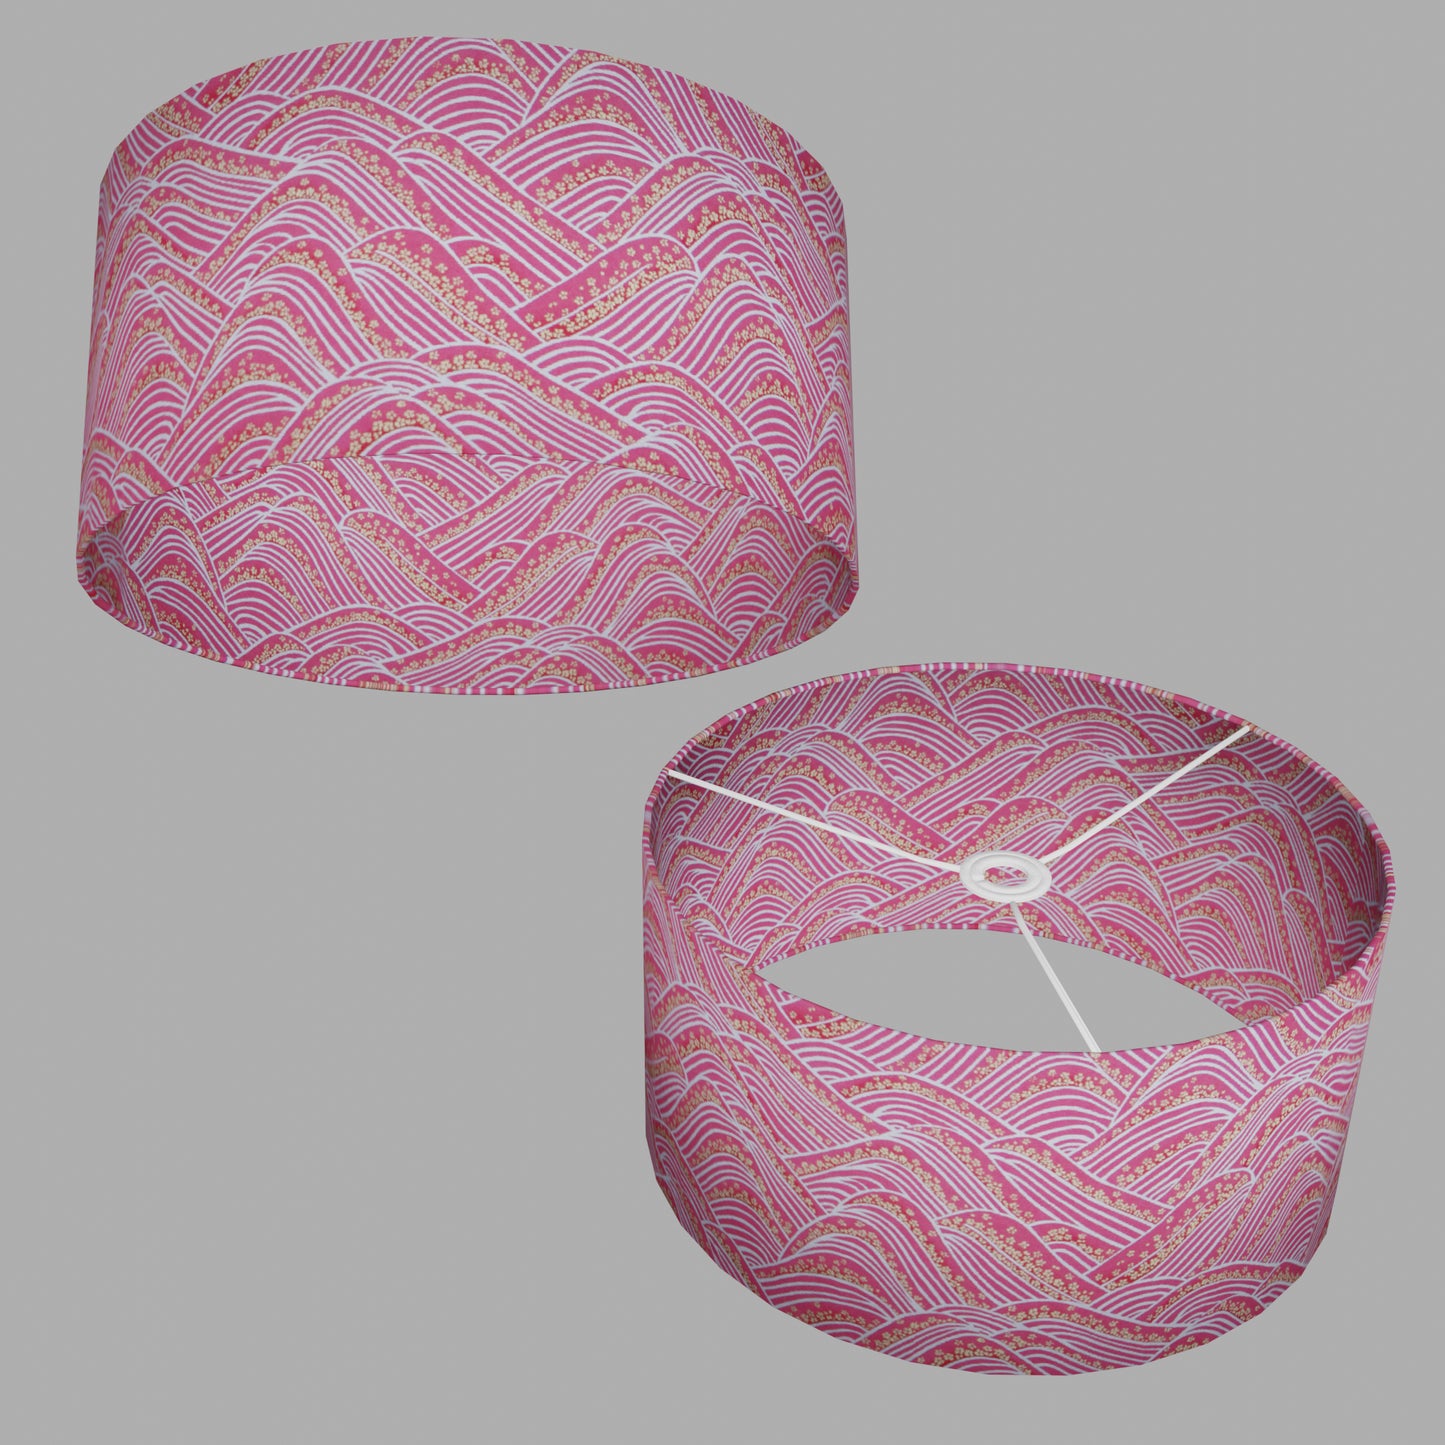 Drum Lamp Shade - W04 ~ Pink Hills with Gold Flowers, 40cm(d) x 20cm(h)